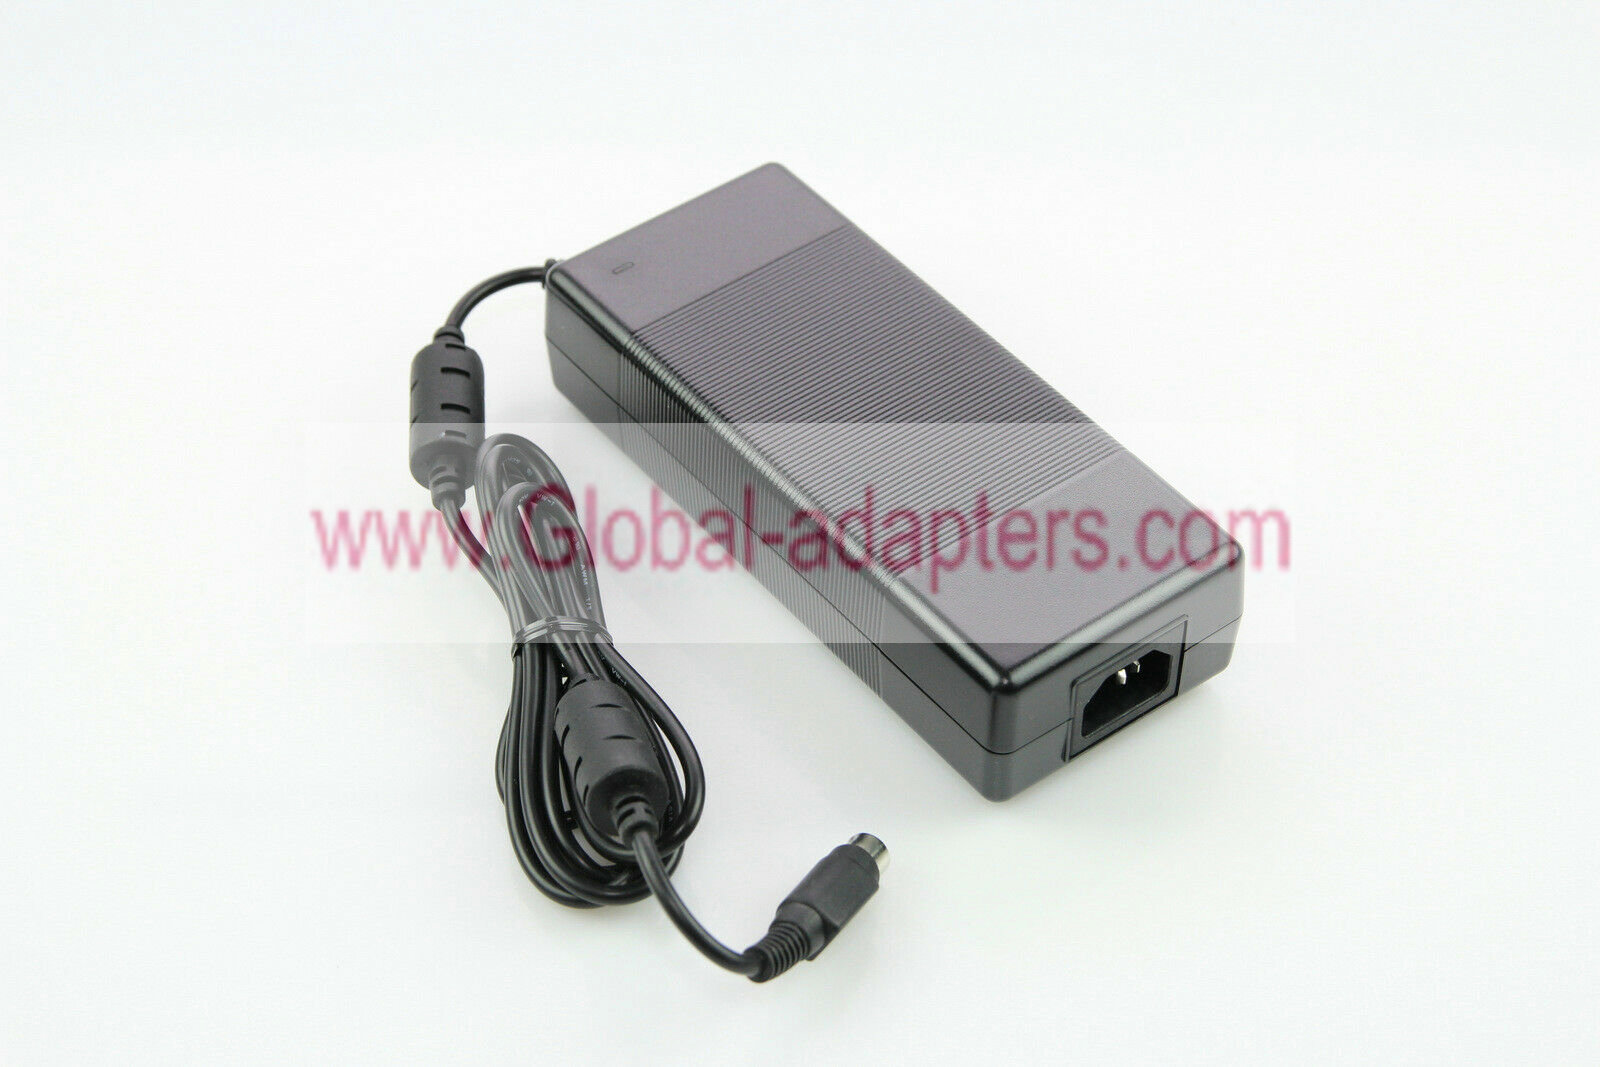 NEW FSP 19VDC 7.89A AC DC Adapter For FSP FSP150-ABAN1 9NA1501600 Power Supply 4-Pin - Click Image to Close